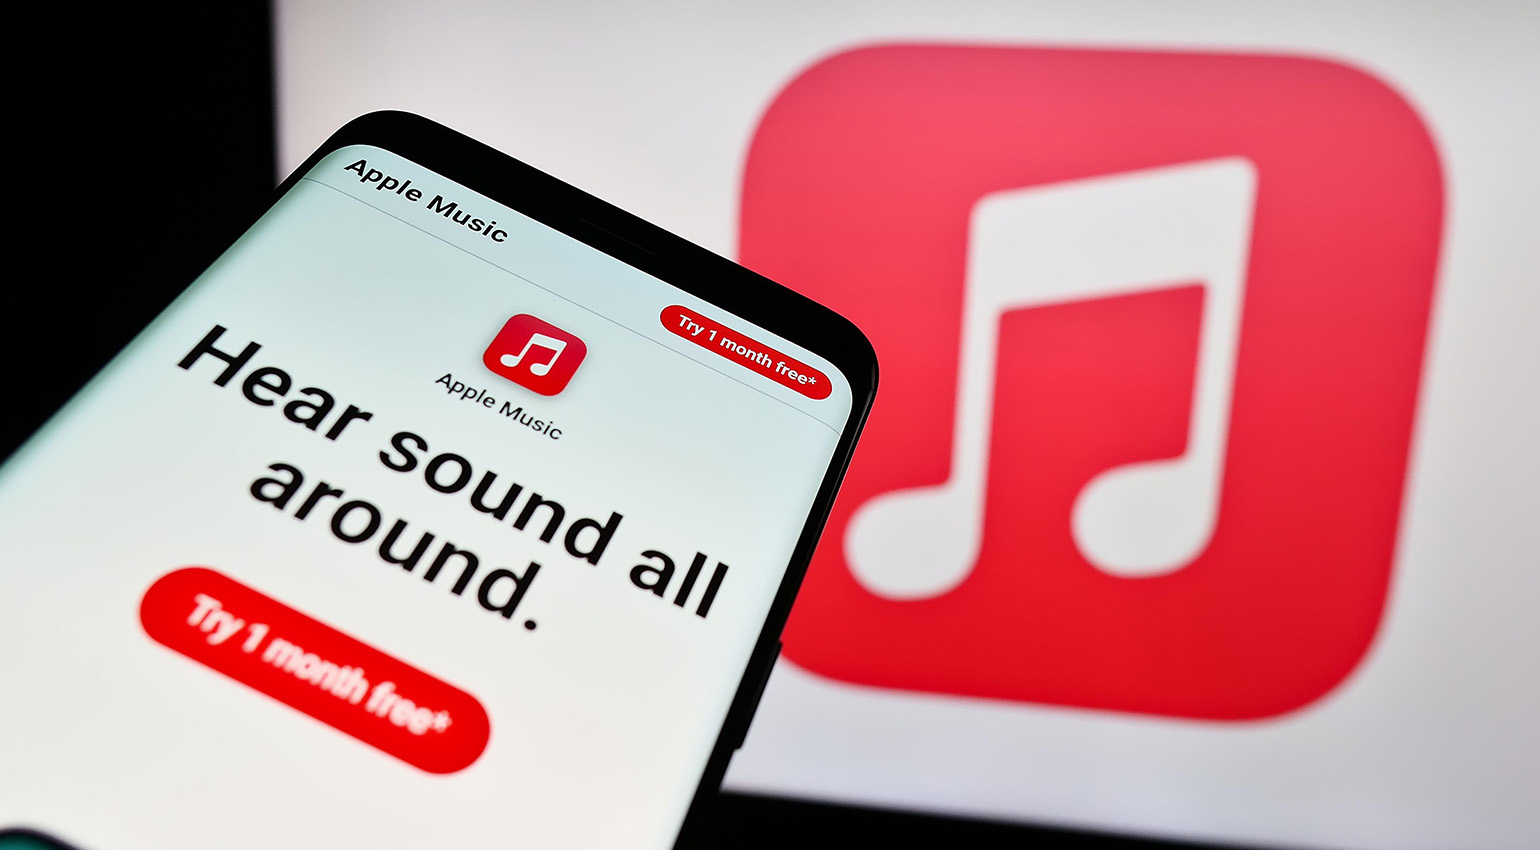 Apple Music & Spatial Audio: Higher Royalties for Tracks Mixed in 3D